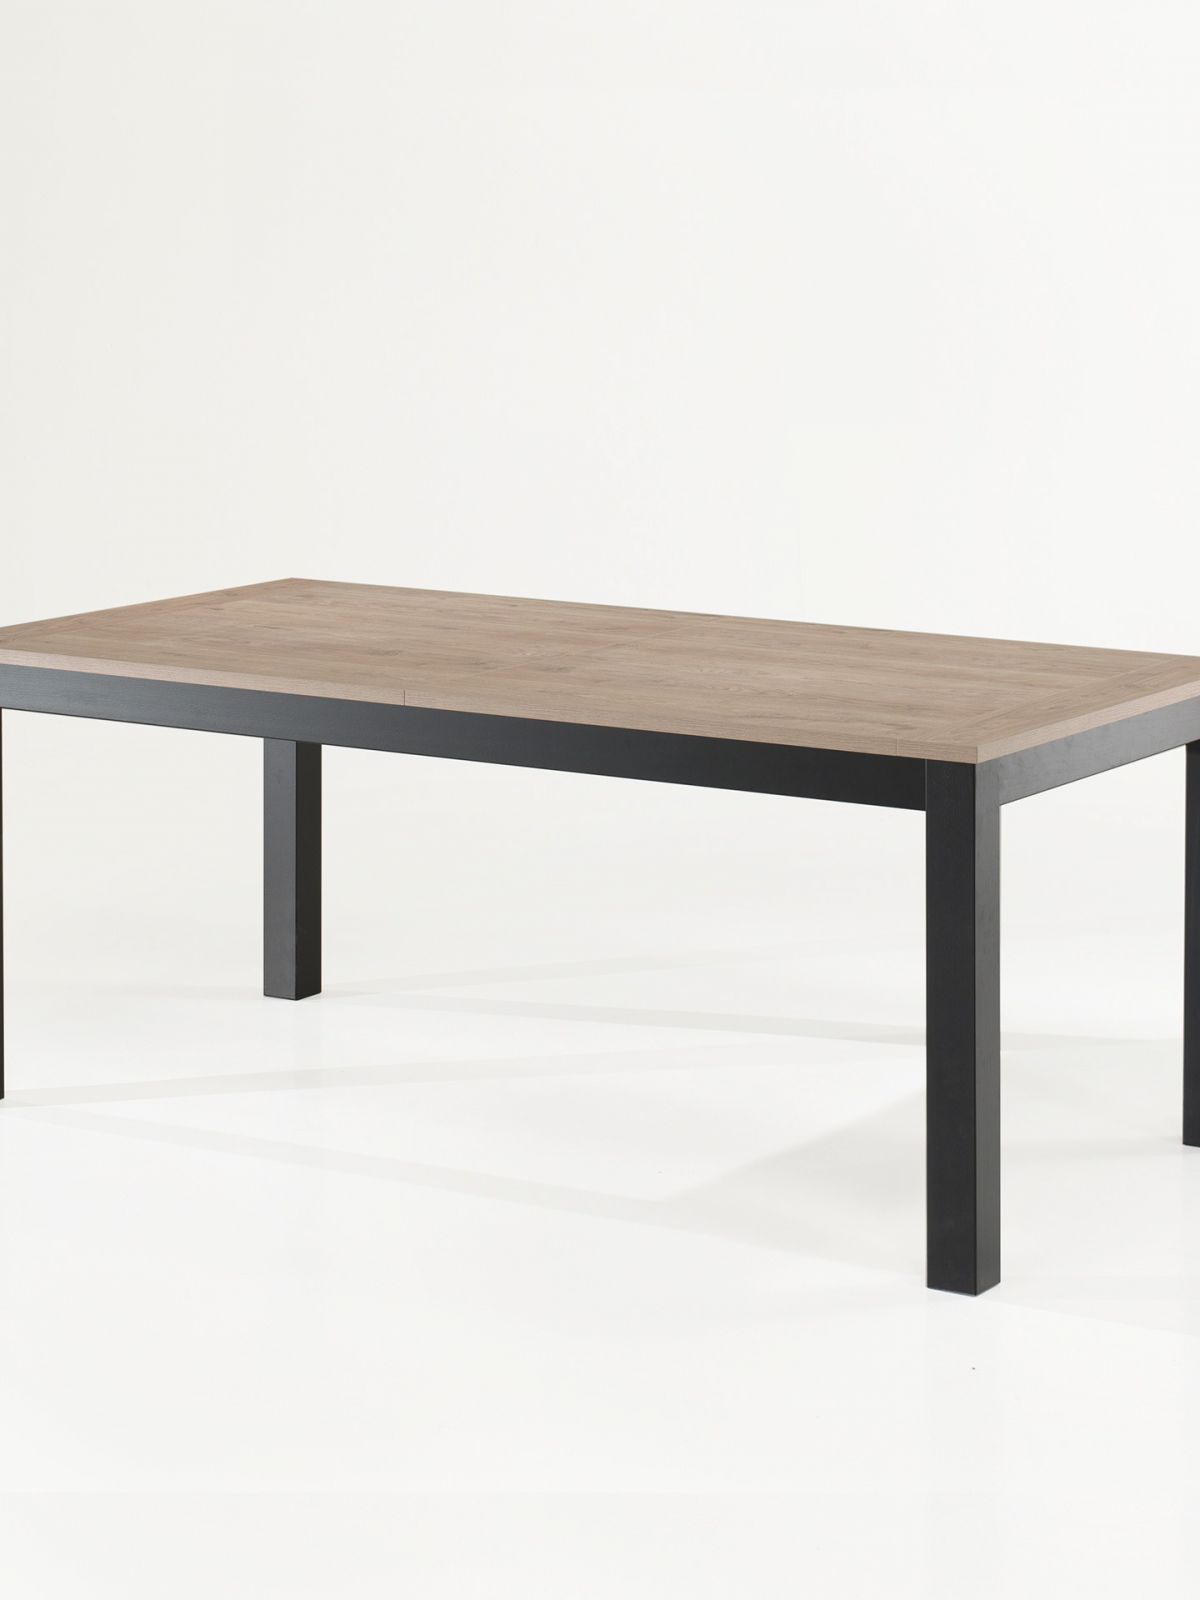 Table fixe rectangulaire 1,80m - 4 pieds